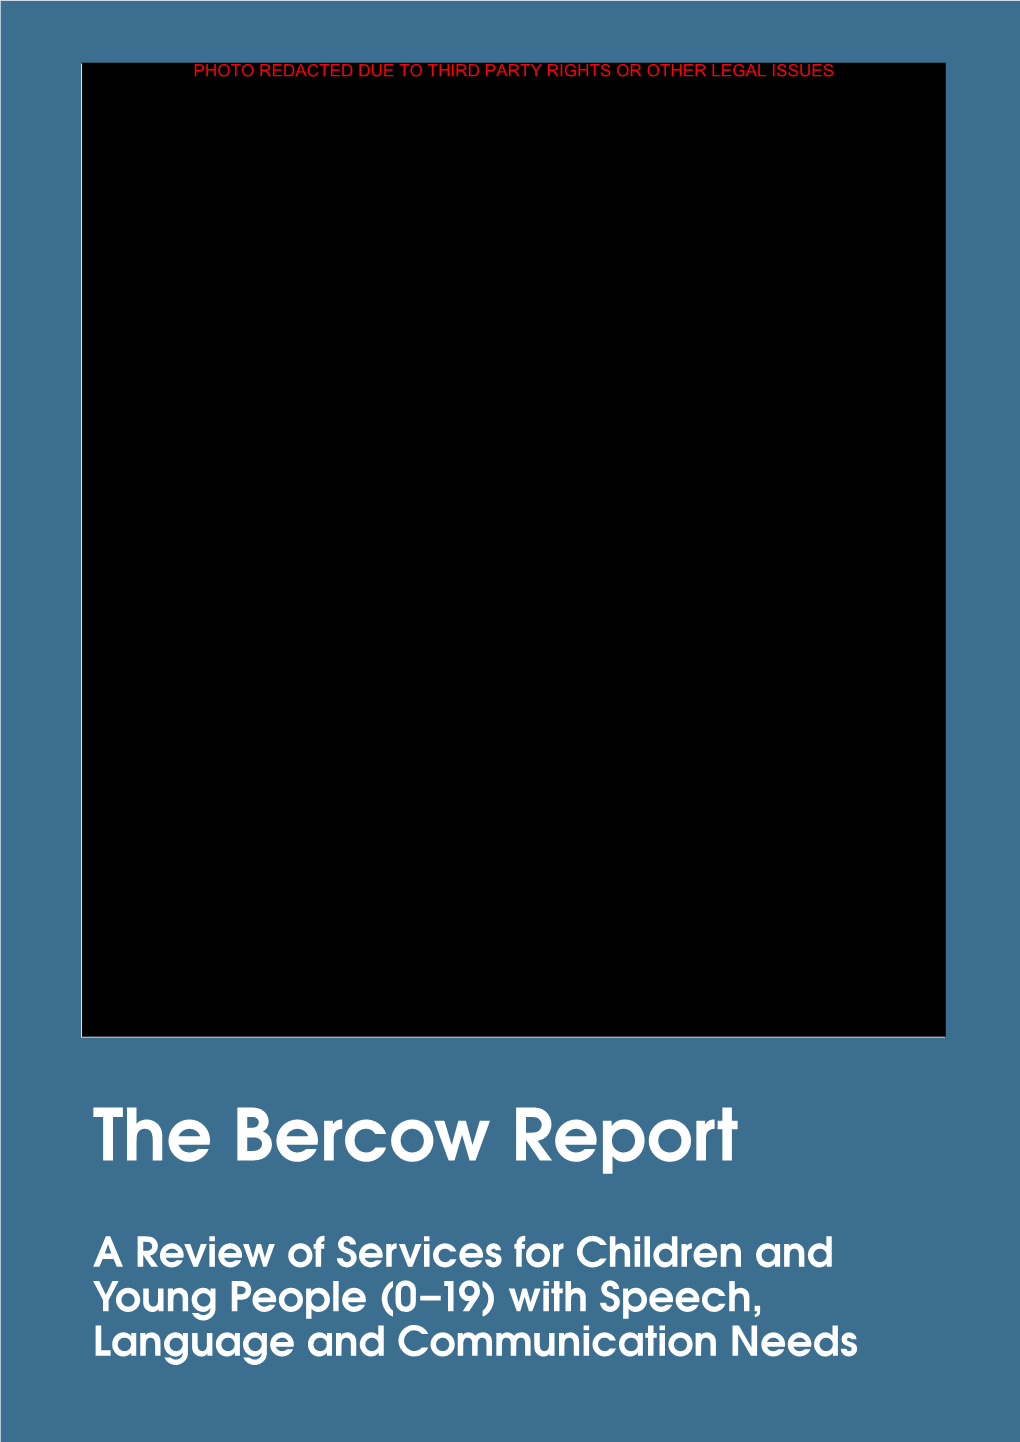 The Bercow Report